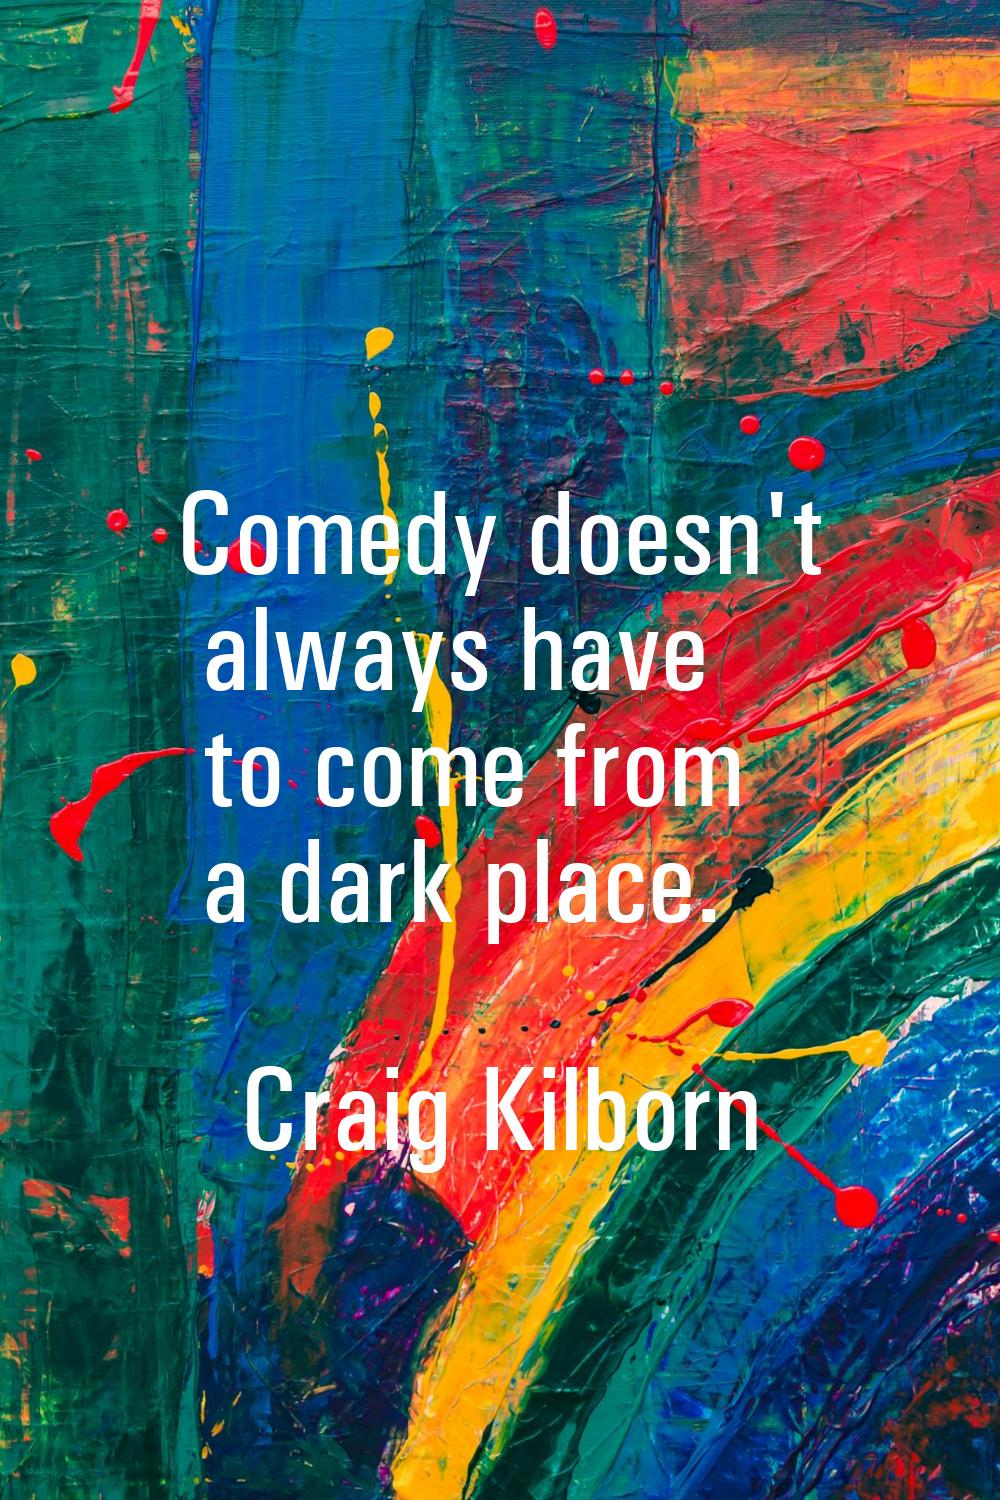 Comedy doesn't always have to come from a dark place.